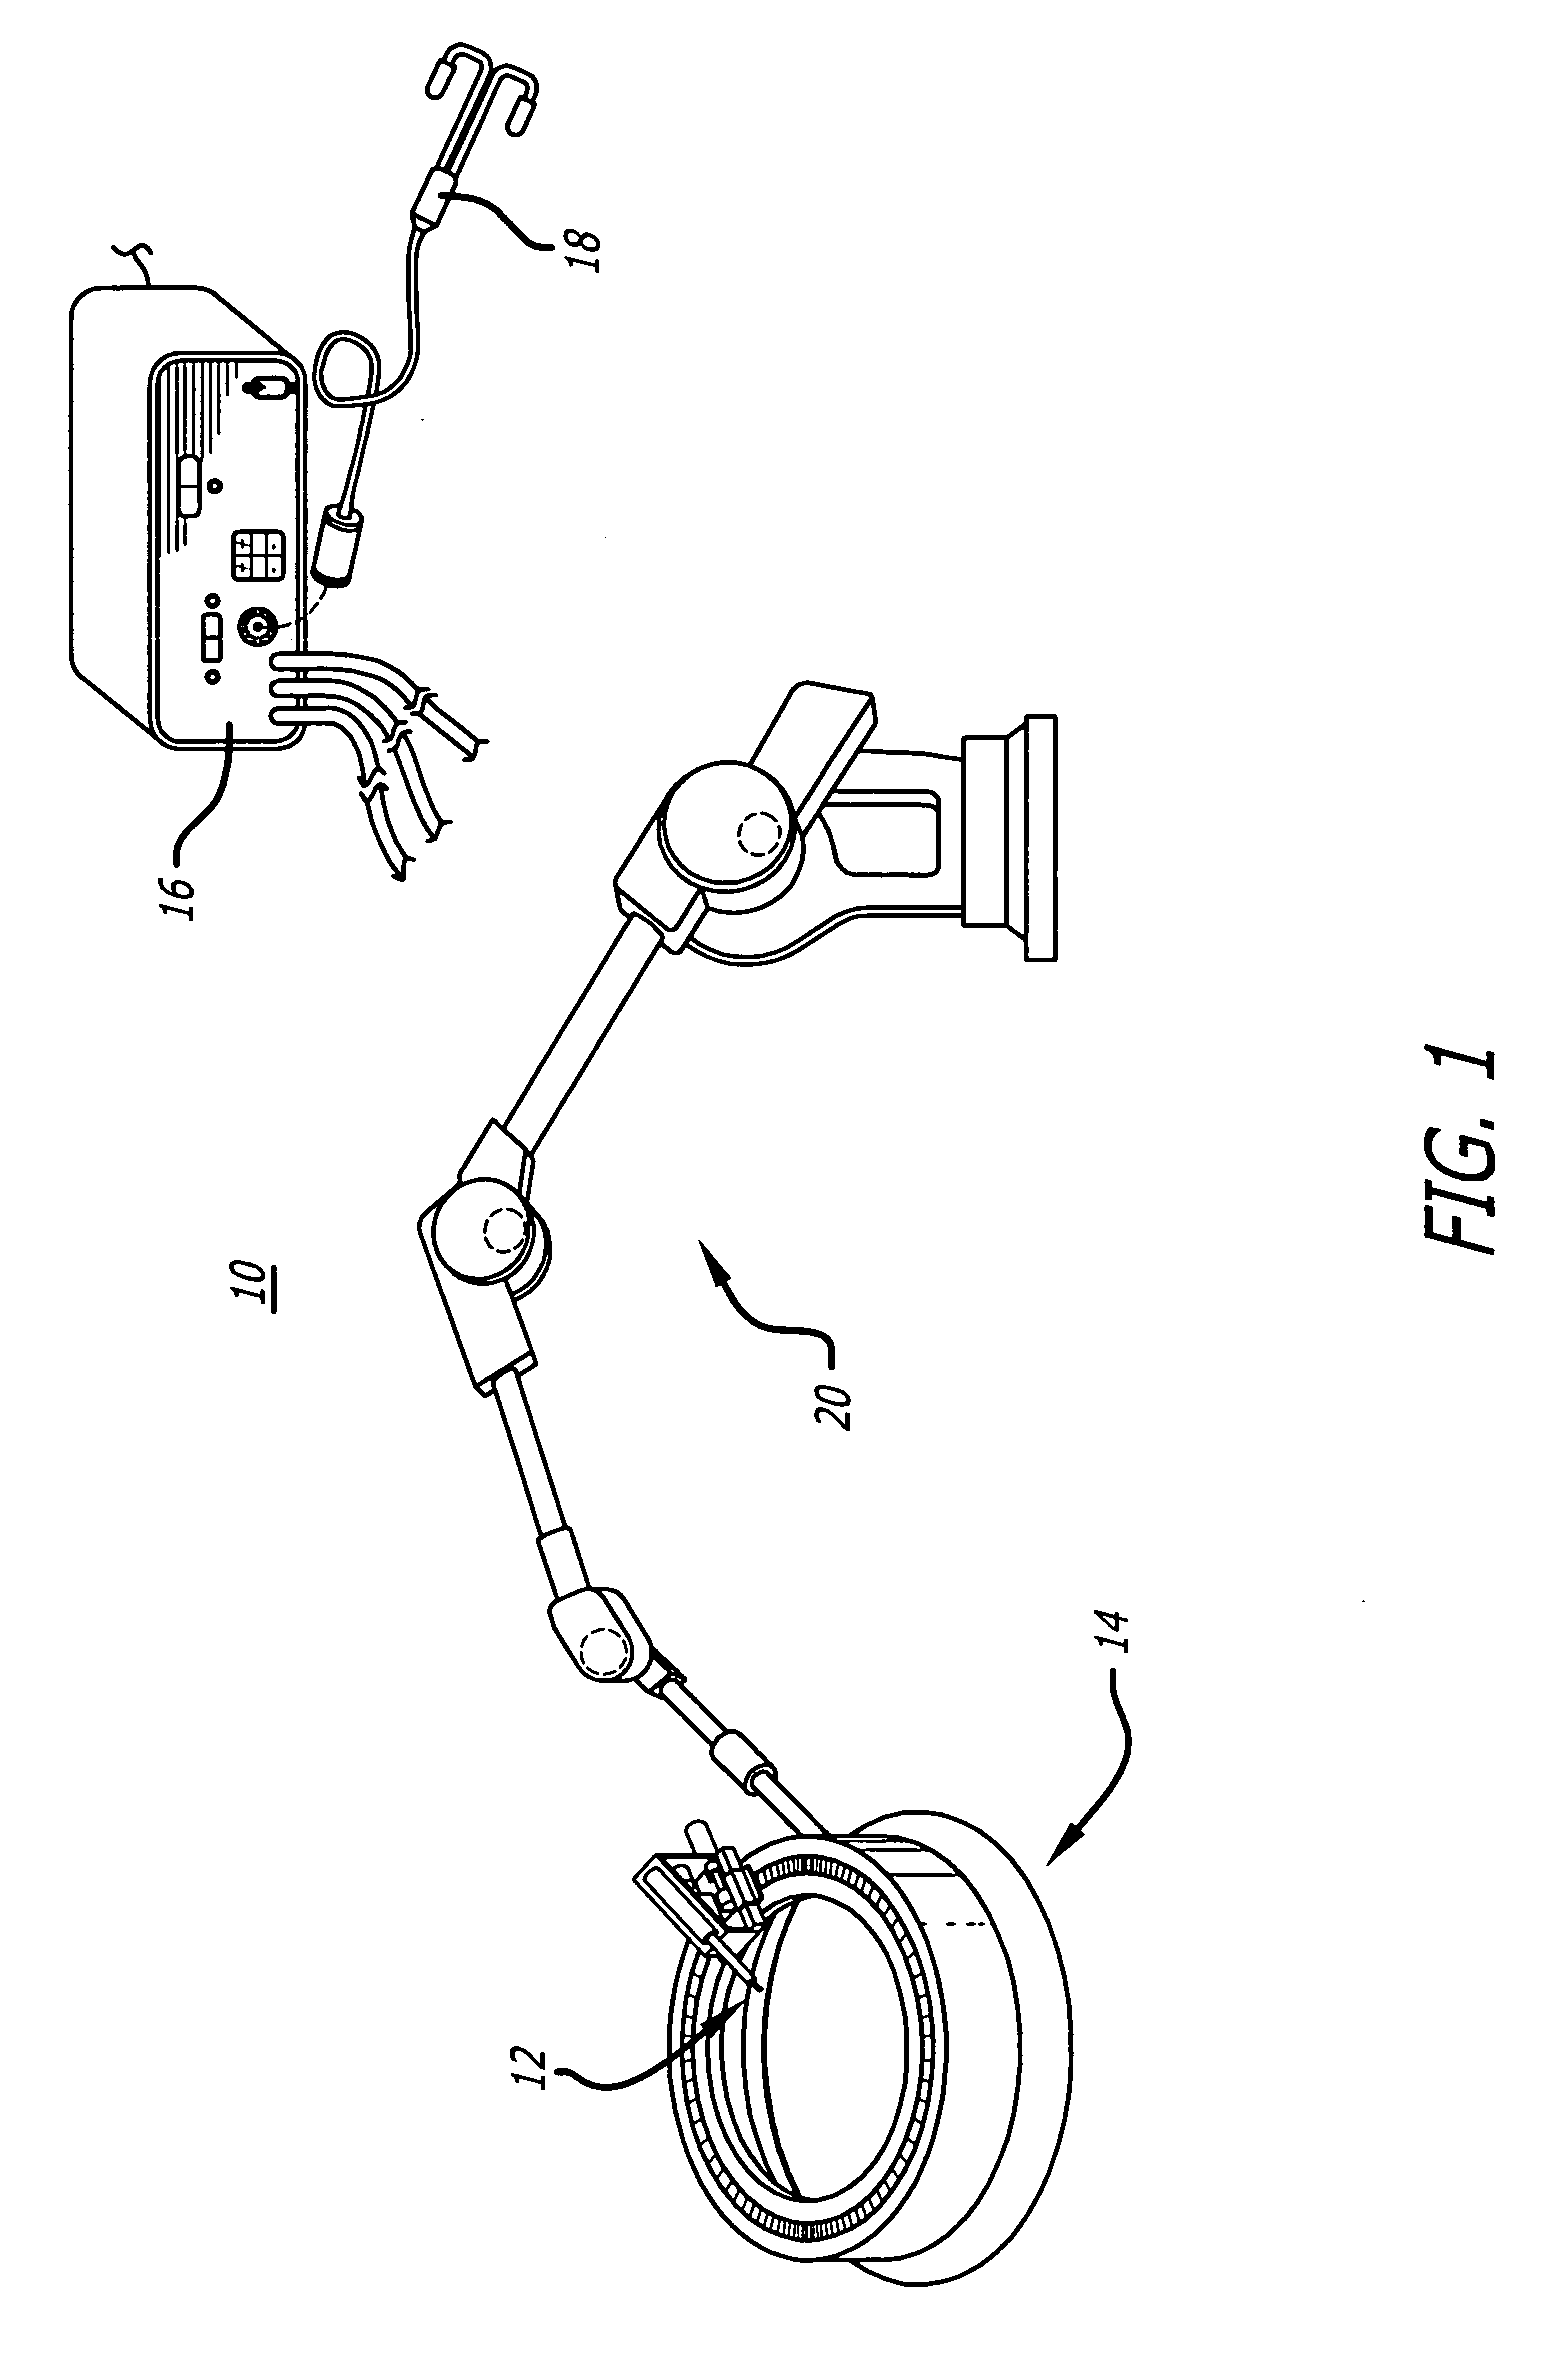 Method and apparatus to automatically insert a probe into a cornea